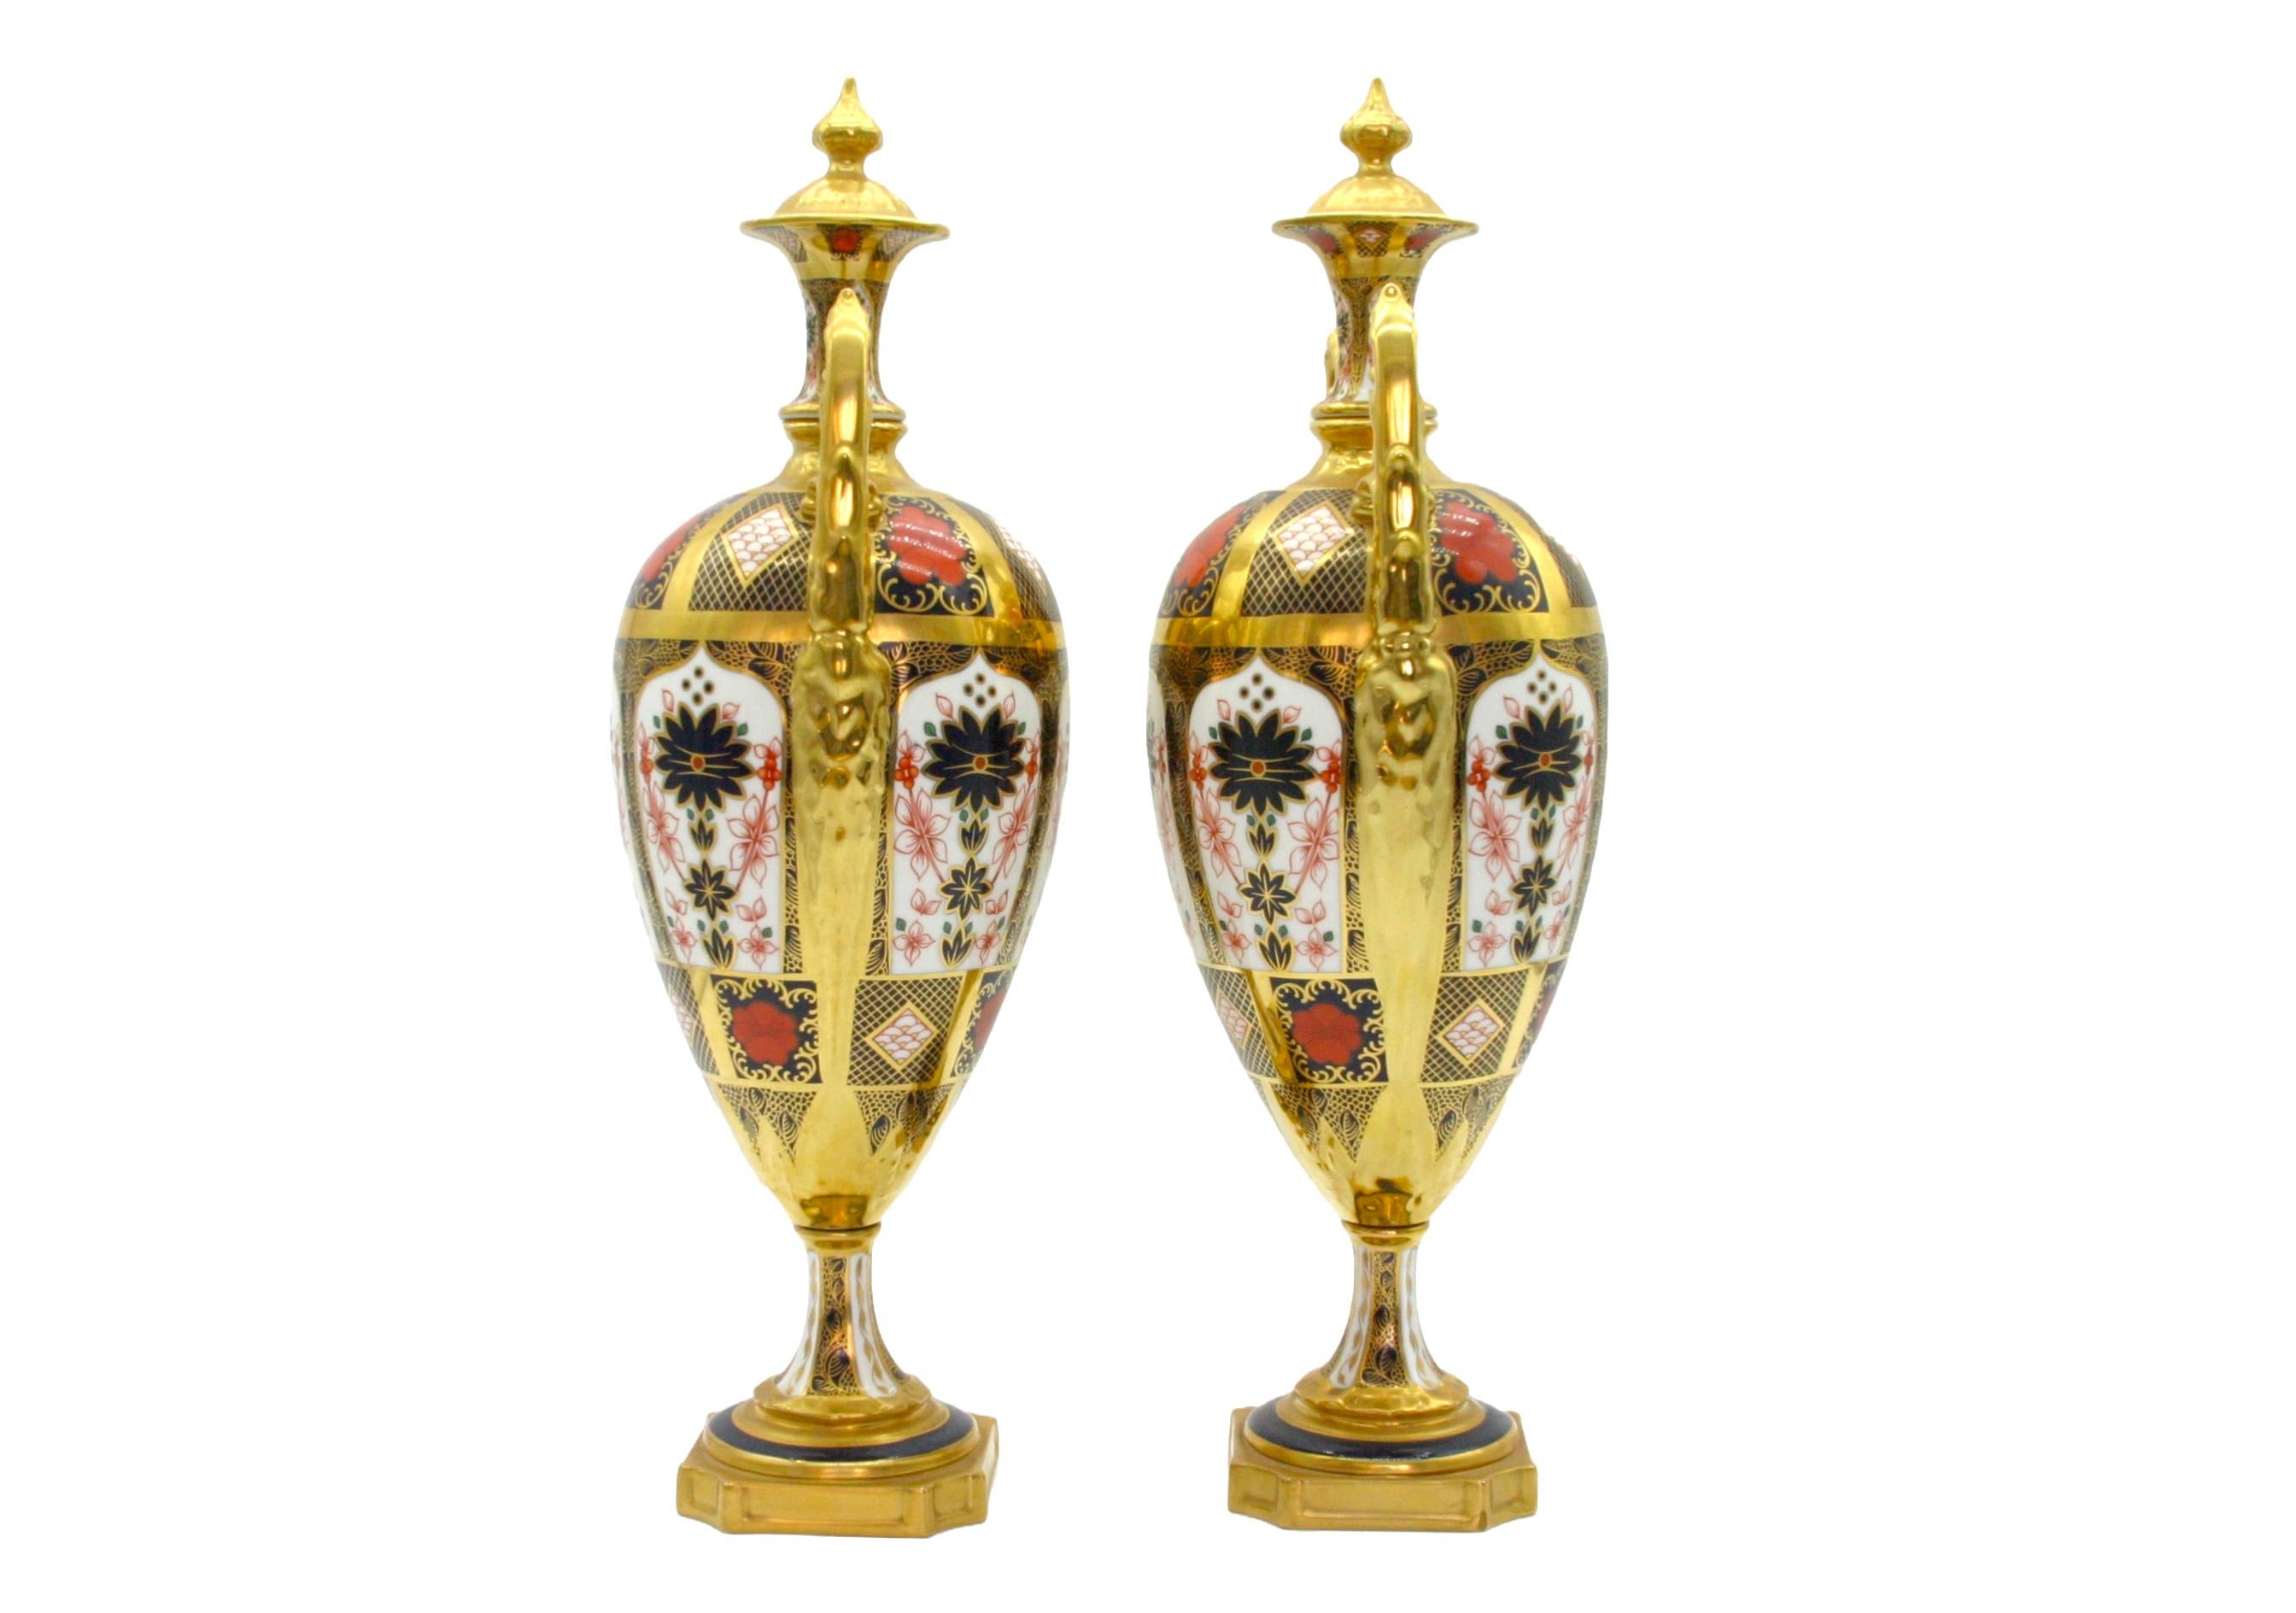 British English Gilt / Painted Royal Crown Derby Vases/Urns For Sale